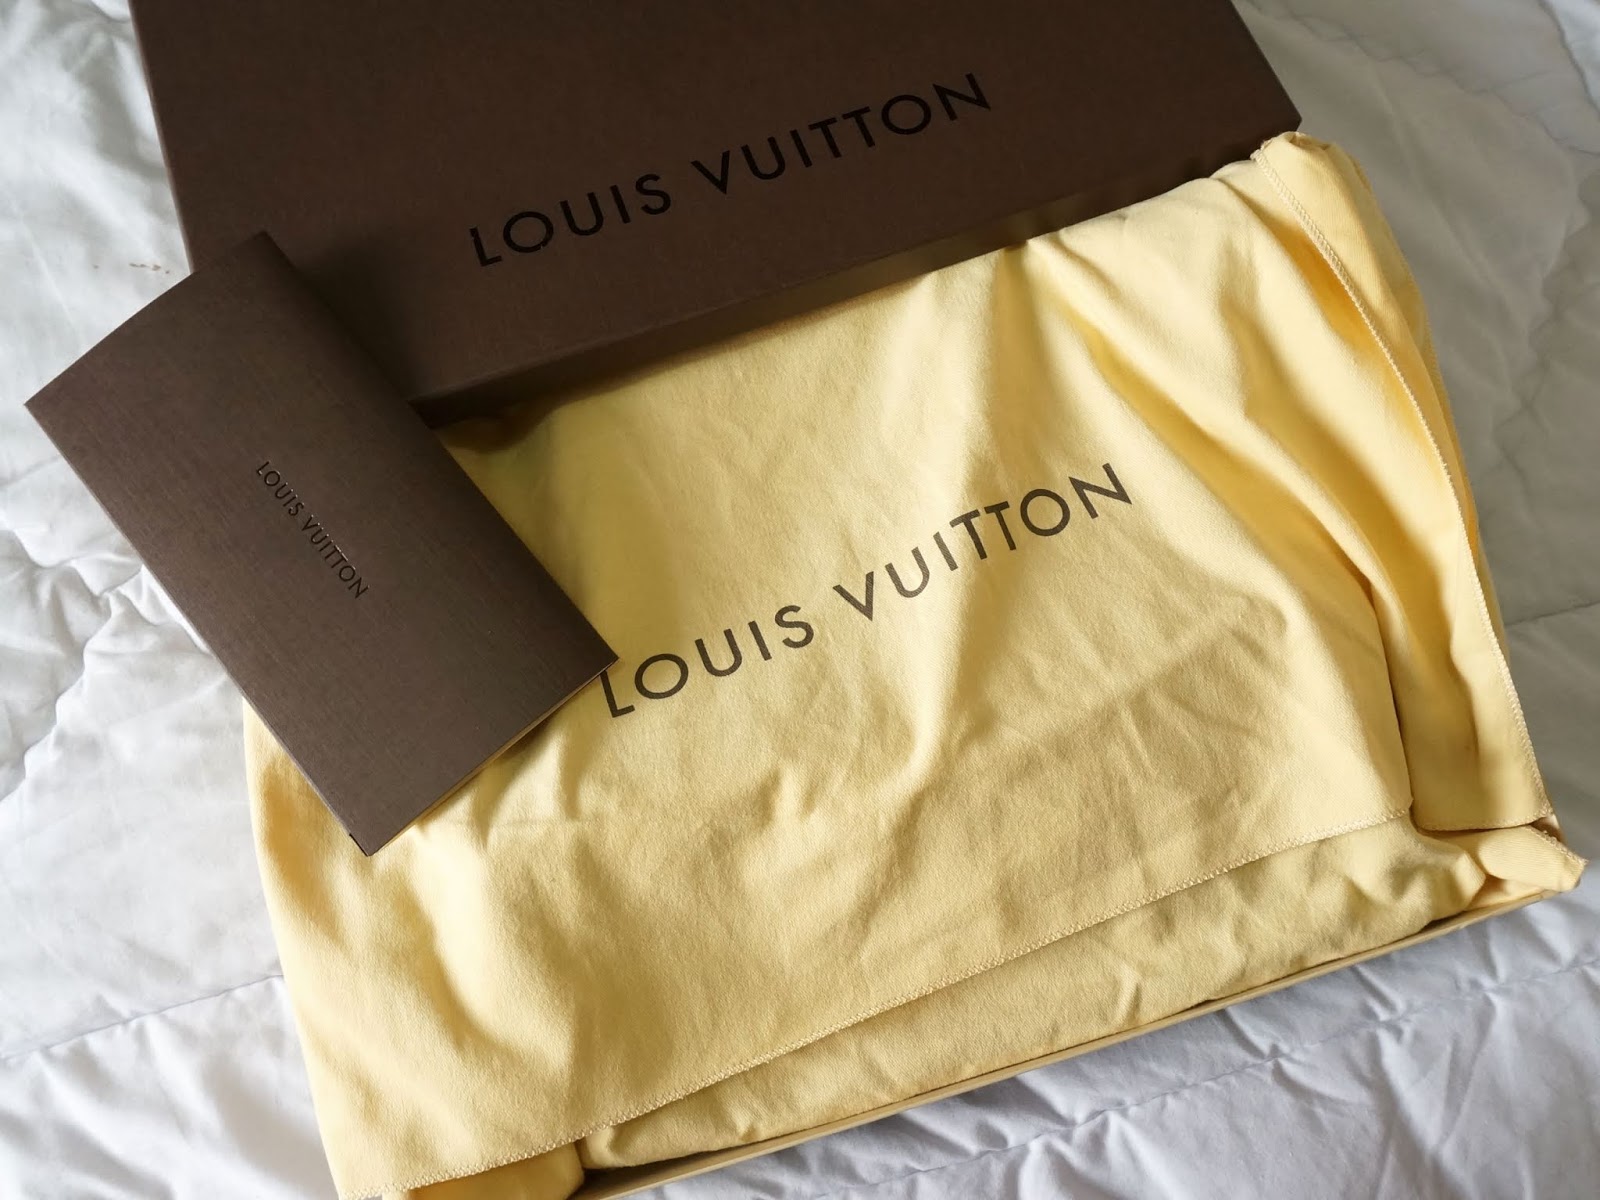 Review: Louis Vuitton Neverfull MM Damier Ebene (My very first Louis Vuitton  bag!) – Buy the goddamn bag